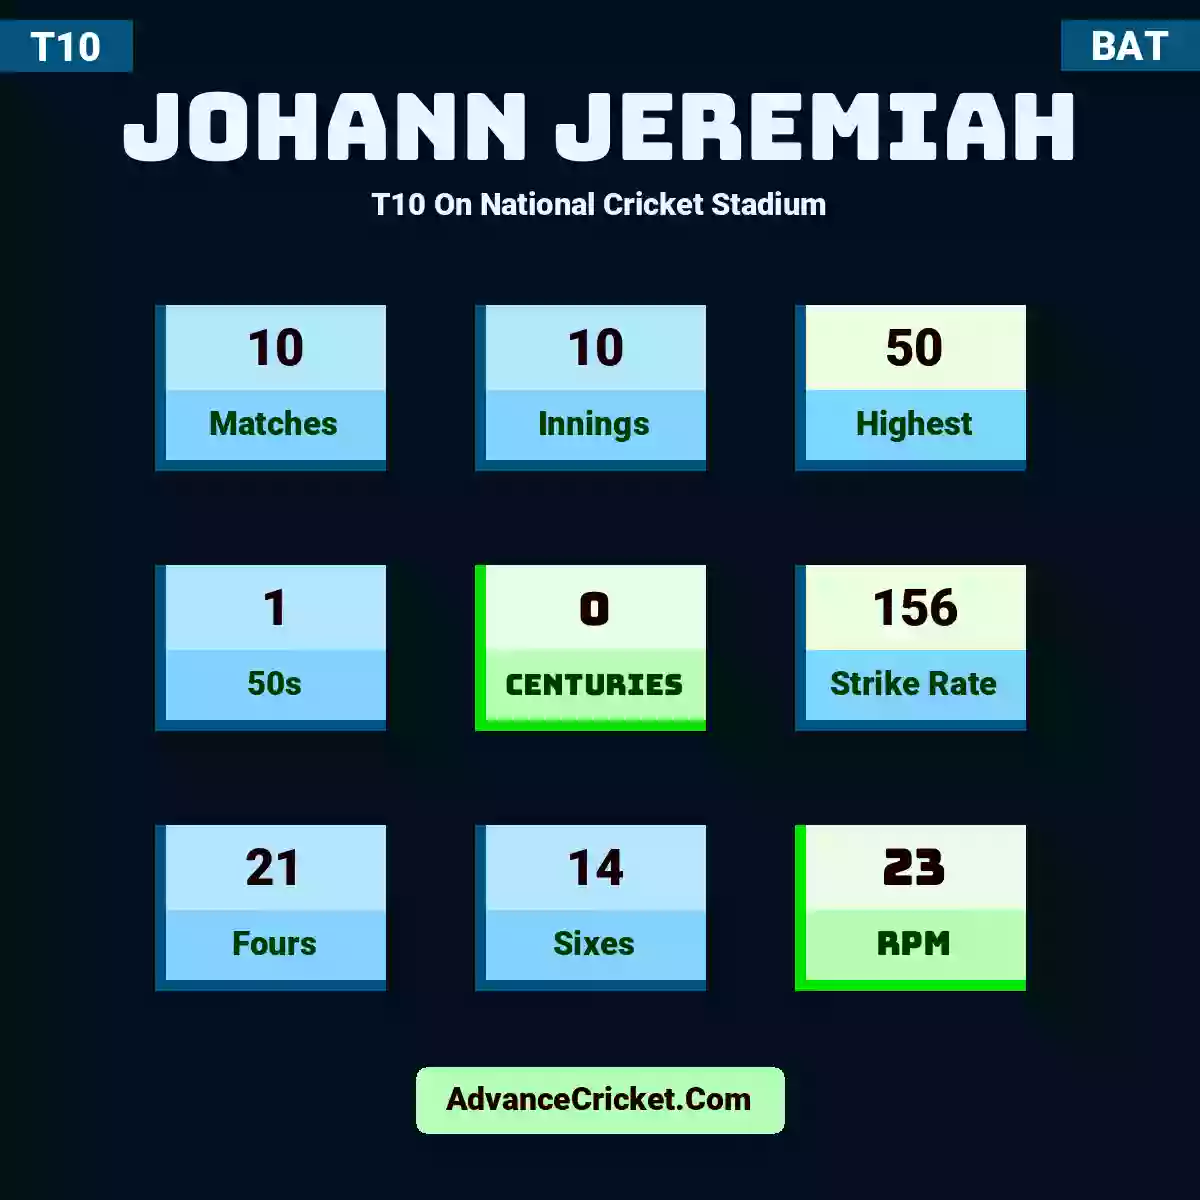 Johann Jeremiah T10  On National Cricket Stadium, Johann Jeremiah played 10 matches, scored 50 runs as highest, 1 half-centuries, and 0 centuries, with a strike rate of 156. J.Jeremiah hit 21 fours and 14 sixes, with an RPM of 23.